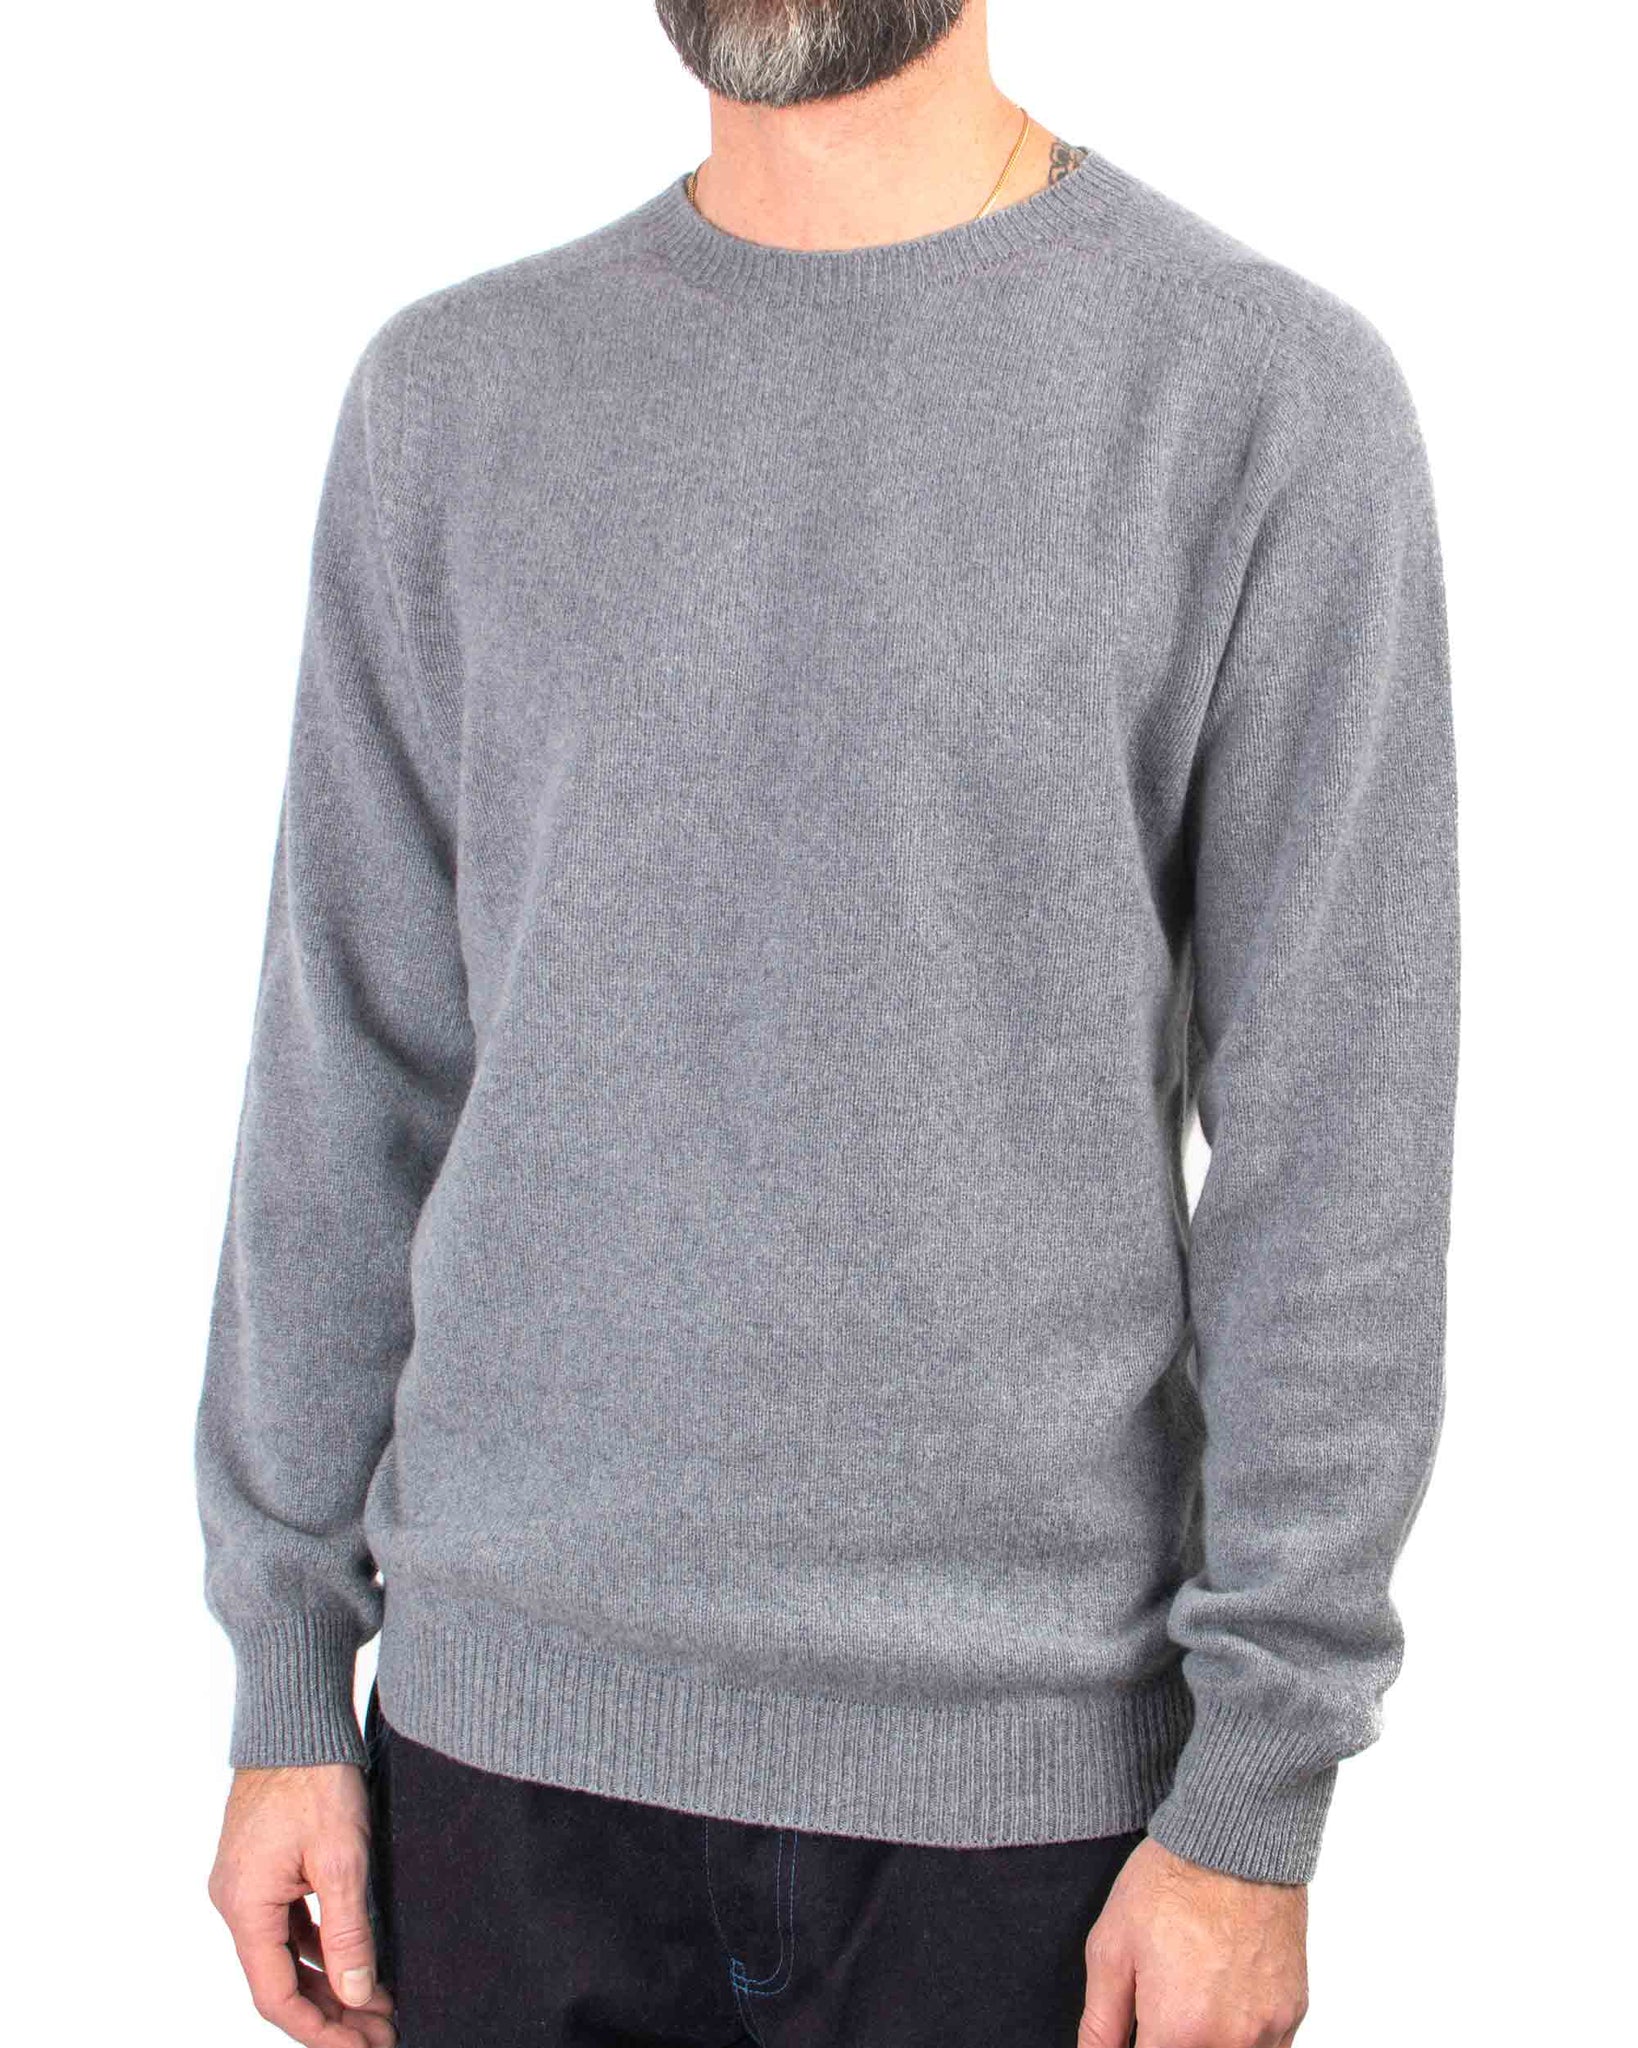 Lost & Found Wool Cashmere Sweater Pew Pew Close